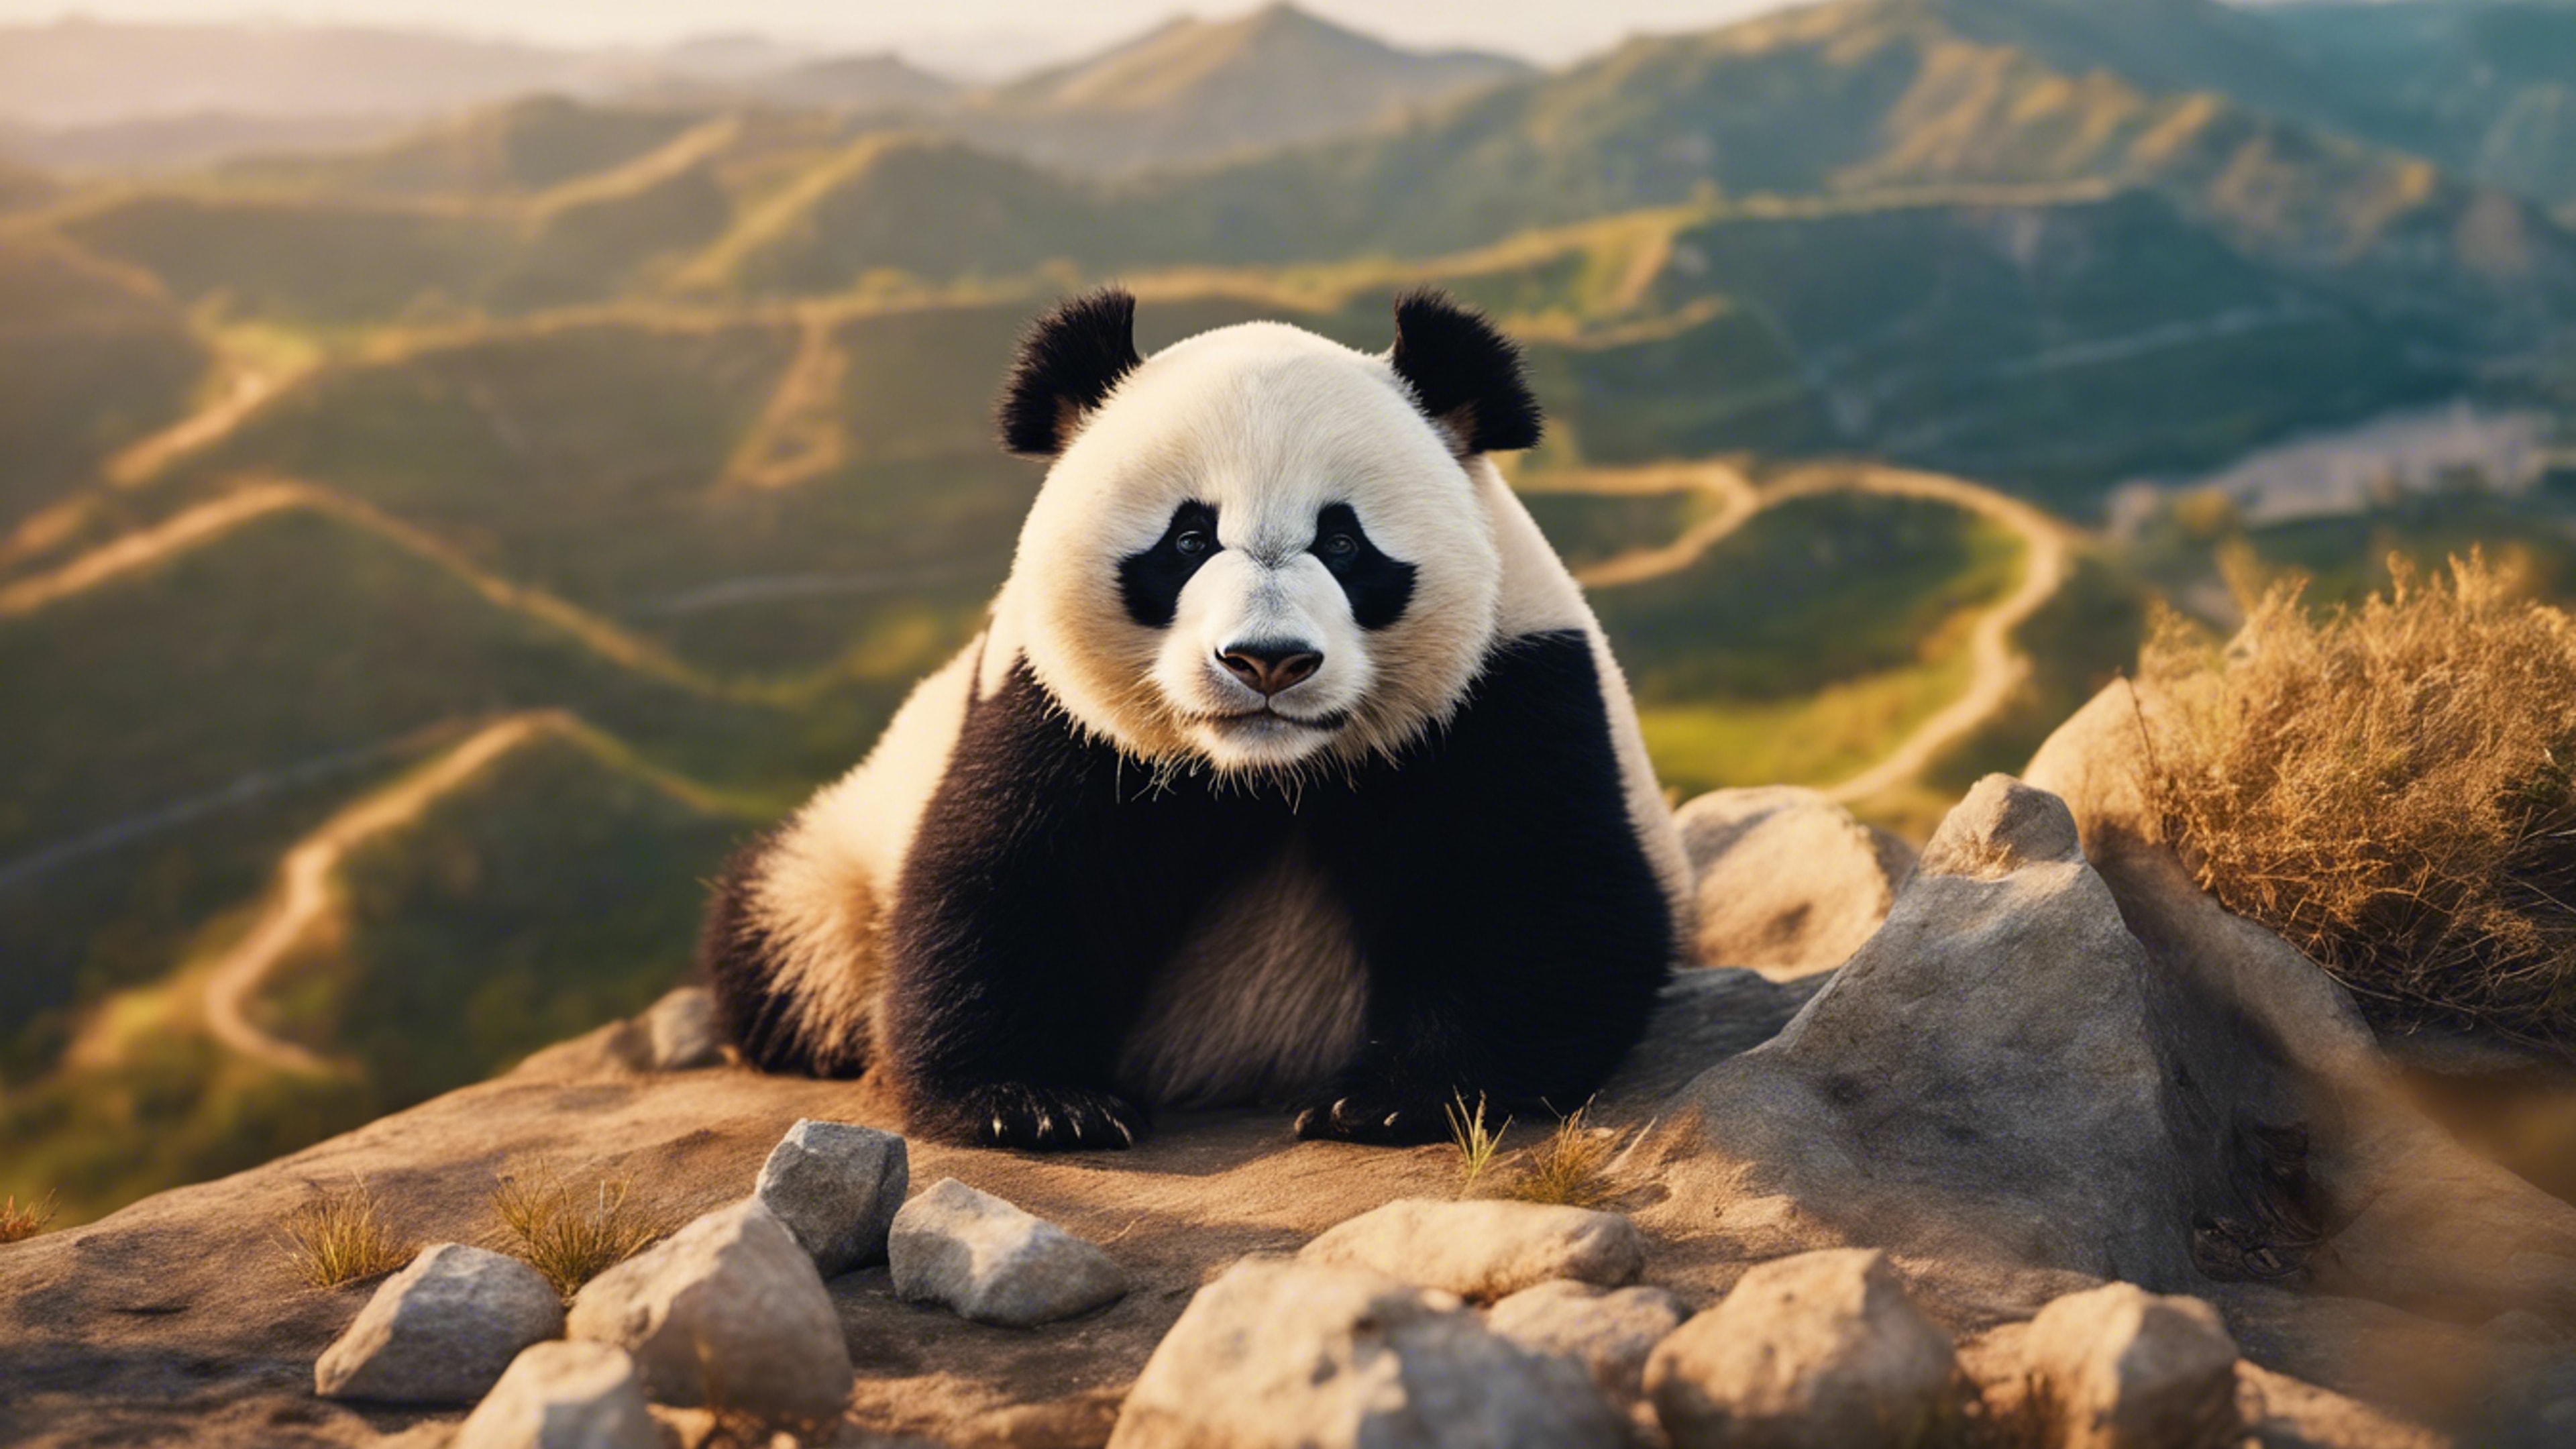 A proud panda basking in the warm sunlight, on a cliff overlooking a wide, beautiful valley. Валлпапер[f1b4c4cbced14ad39a34]